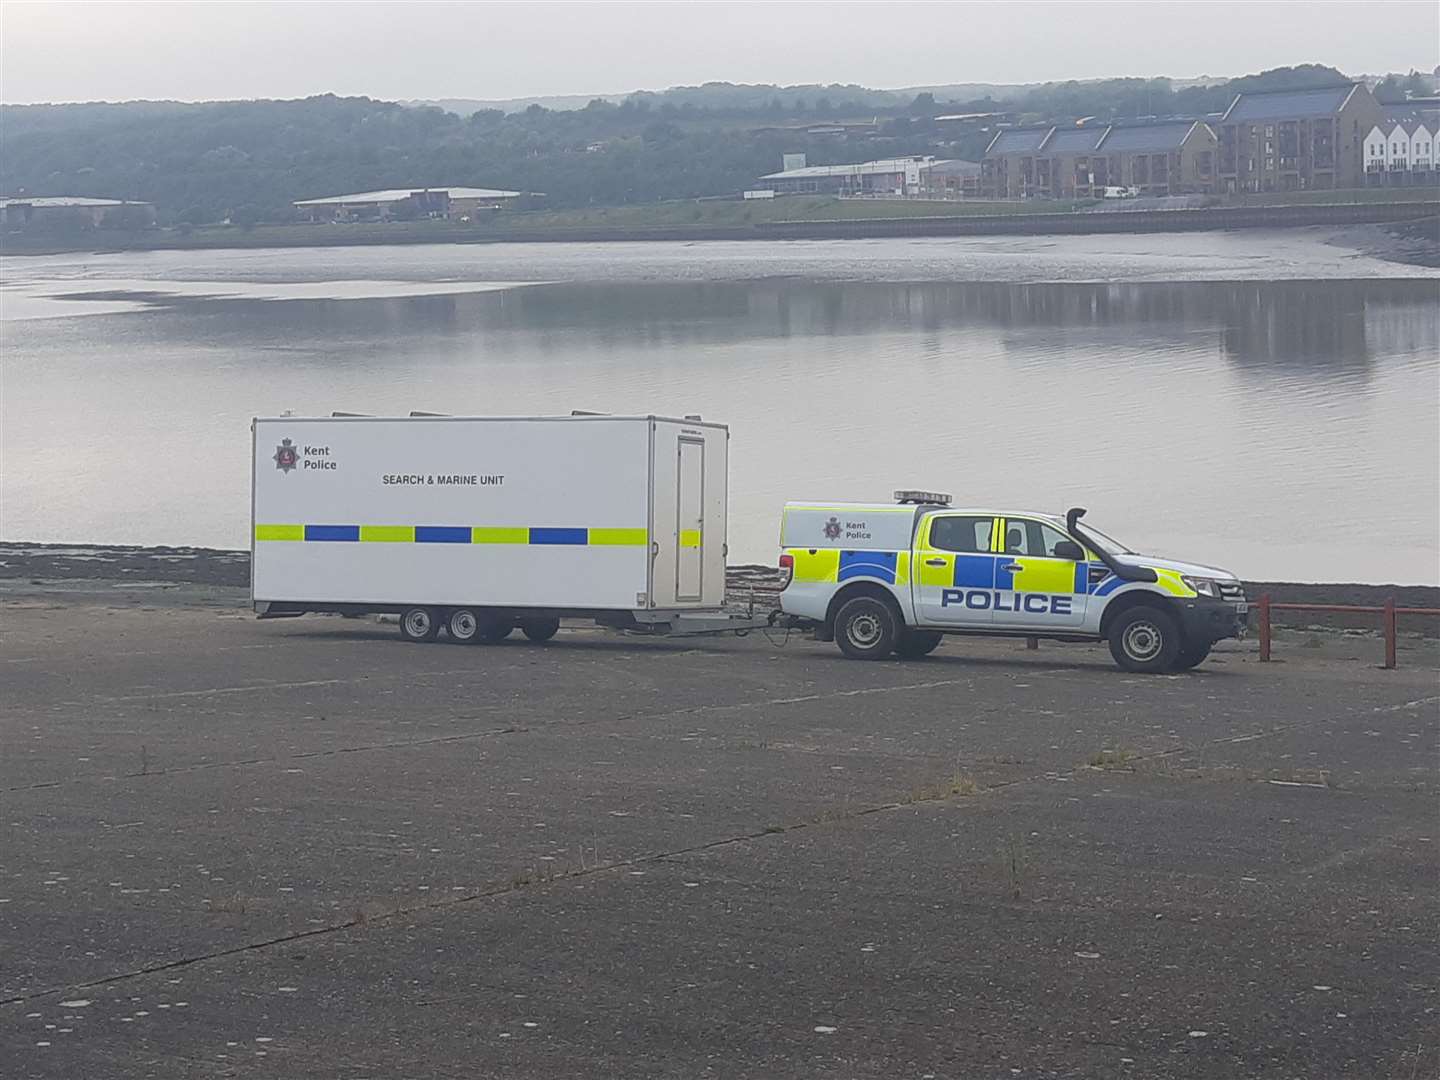 A police search and marine unit was parked outside Medway Rowing Club on Friday, August 2 as officers searched the river